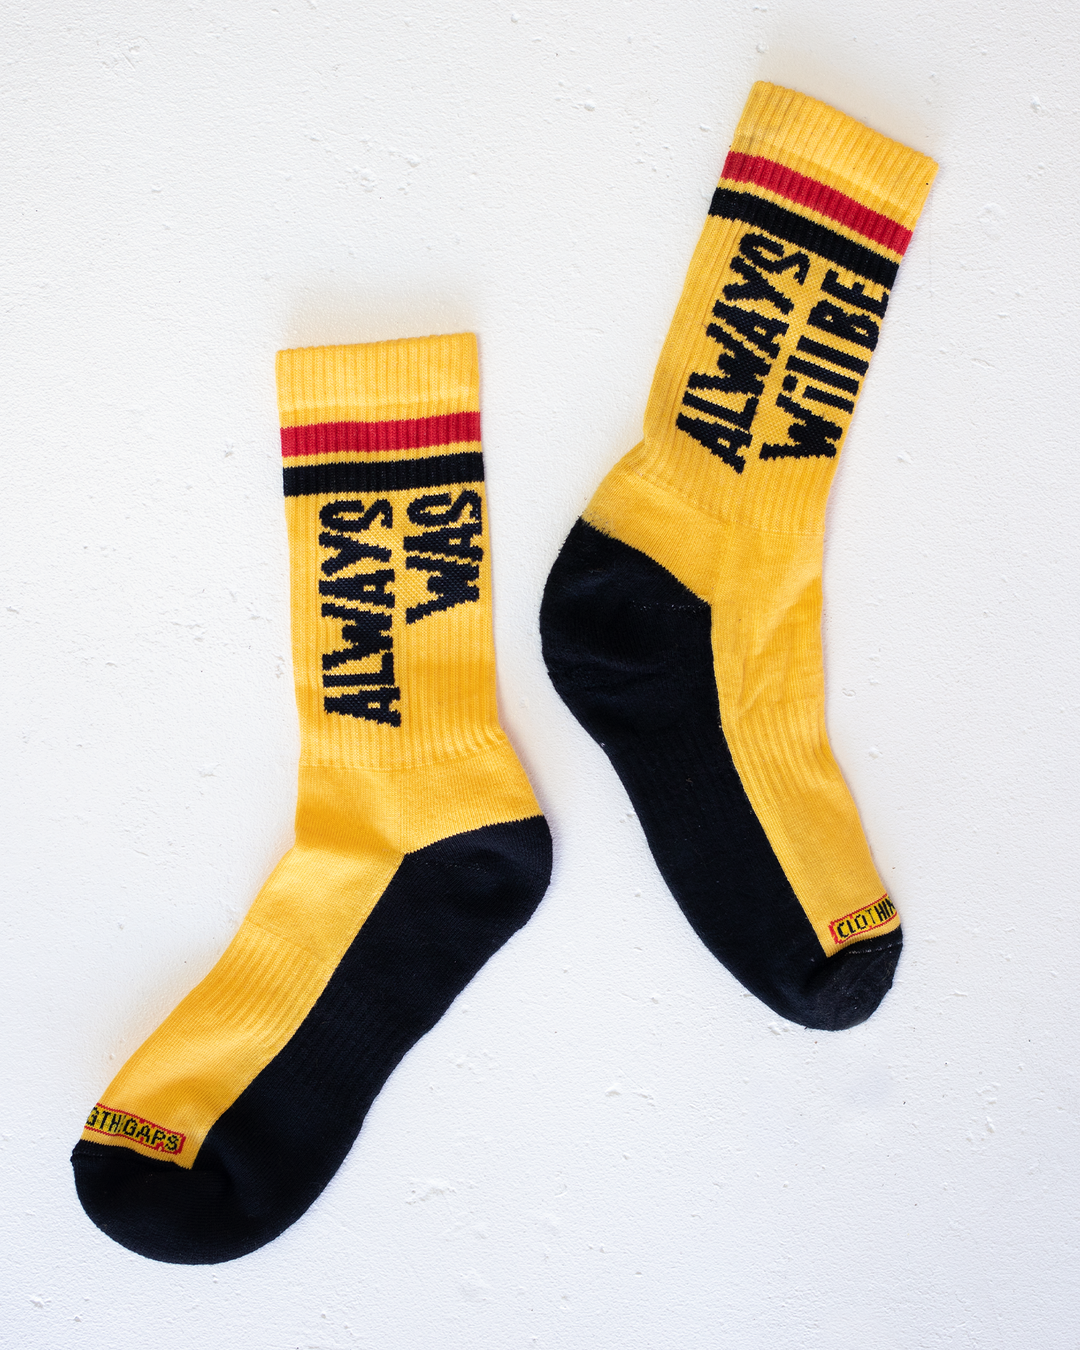 Clothing The Gaps. Power Socks 3 pack. 3 pack red, black and yellow thick cotton socks. Pair 1 Black base sock with 'Always was' on one side of sock and 'Always will be' on other side with red capital text and red and yellow band near top of sock. Pair 2 Red base sock with same text but in yellow and black. With yellow band near top of sock. Pair 3 yellow base sock with same text but in black. With black and red band near top of sock.